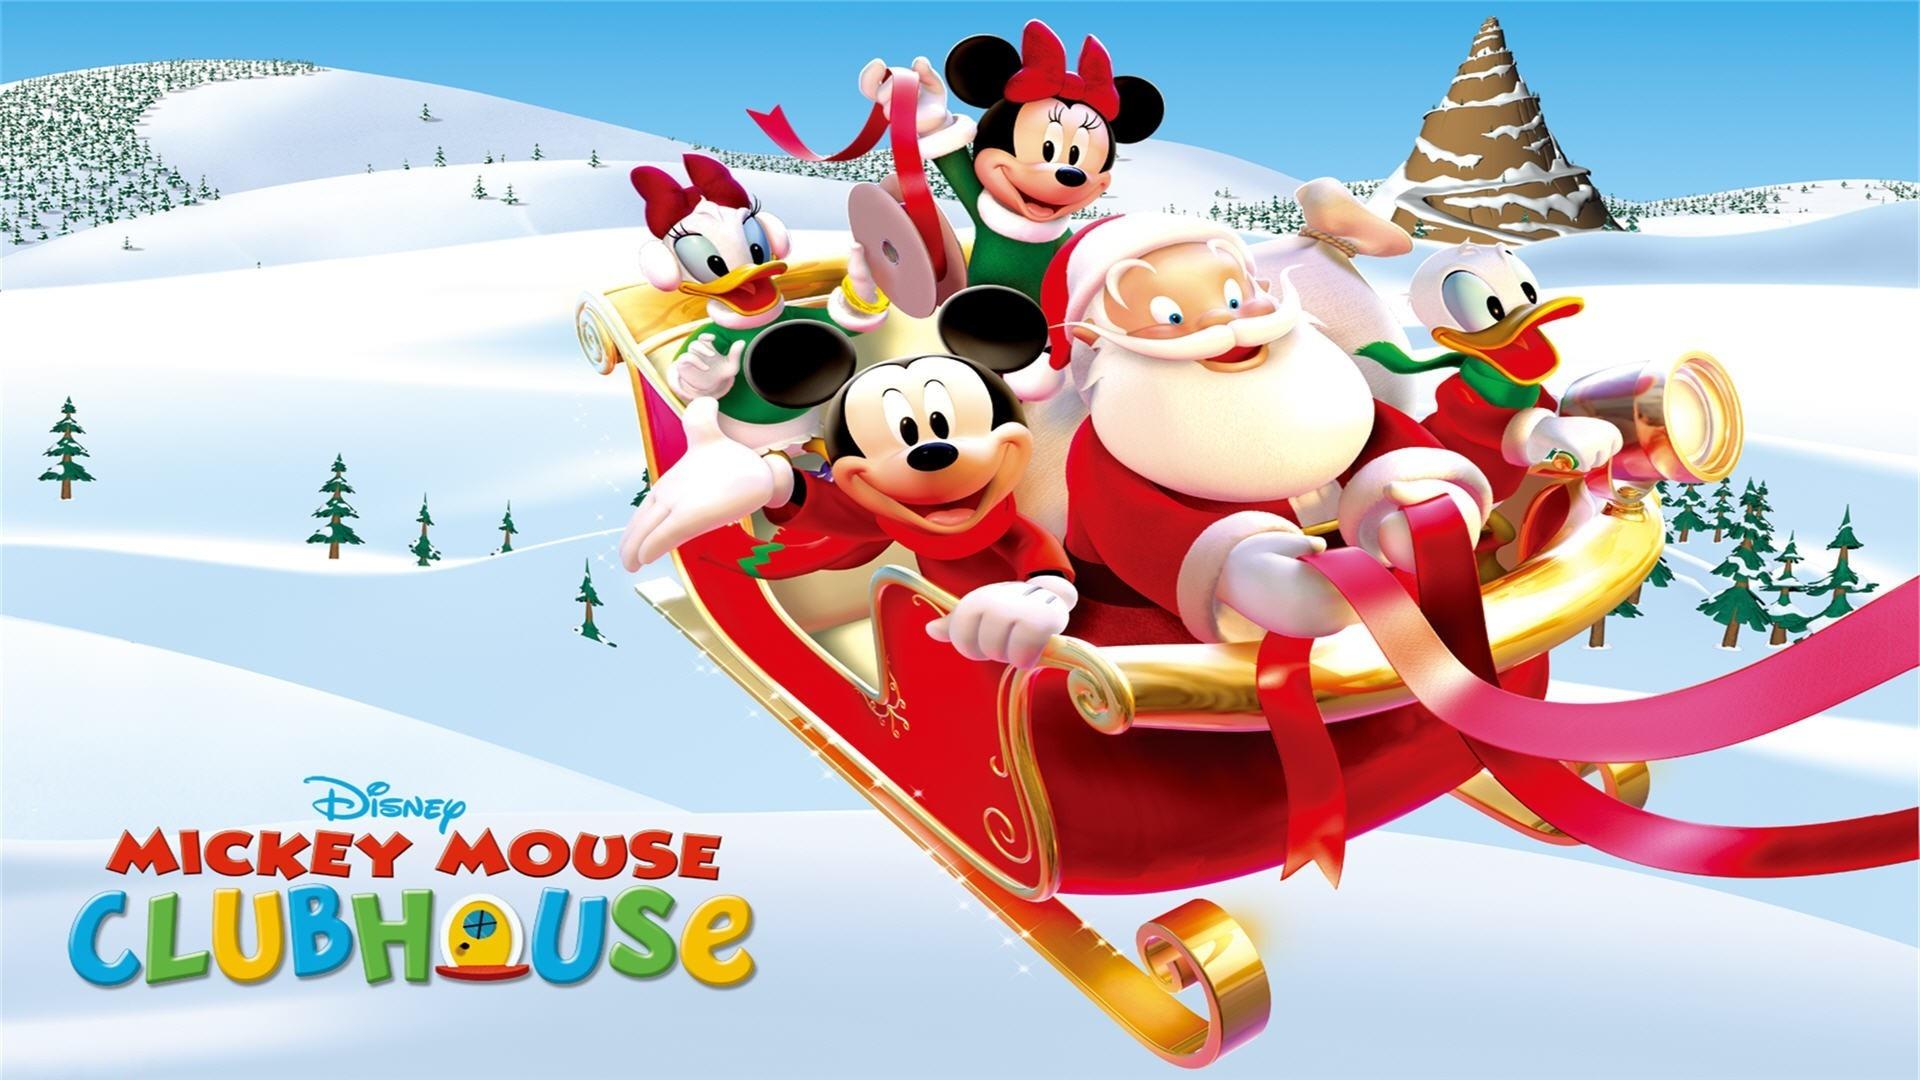 Merry Christmas Mickey Mouse And Friends With Santa Christmas Disney Wallpaper HD 1920x1080, Wallpaper13.com